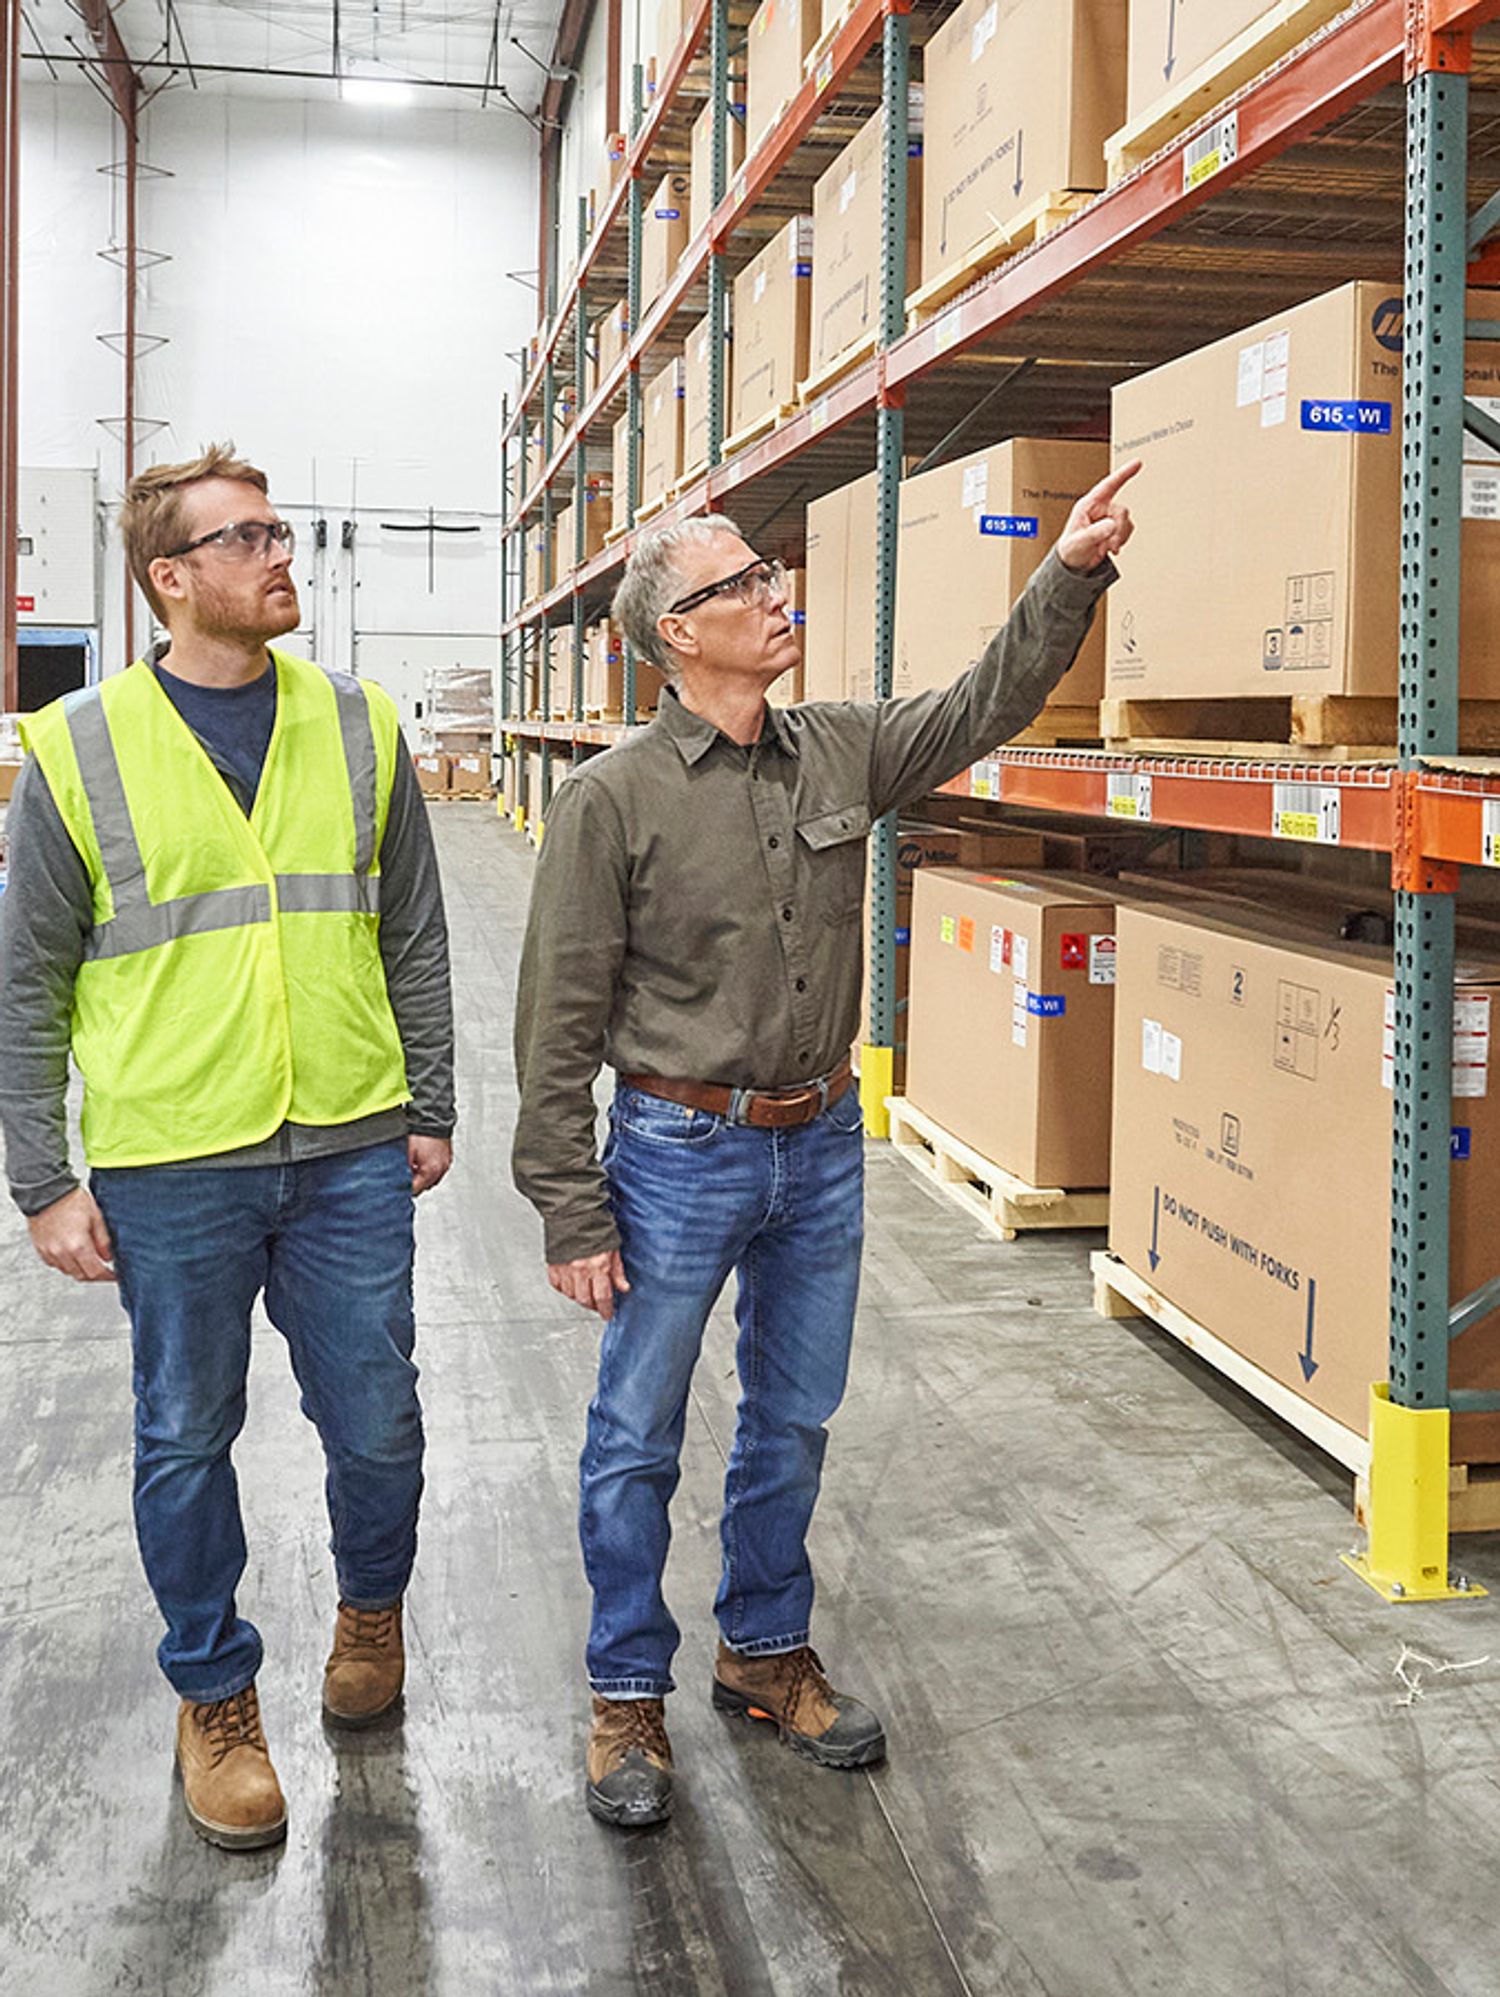 Warehousing Safety Down Beating Osha To The Punch J Keller Compliance Network